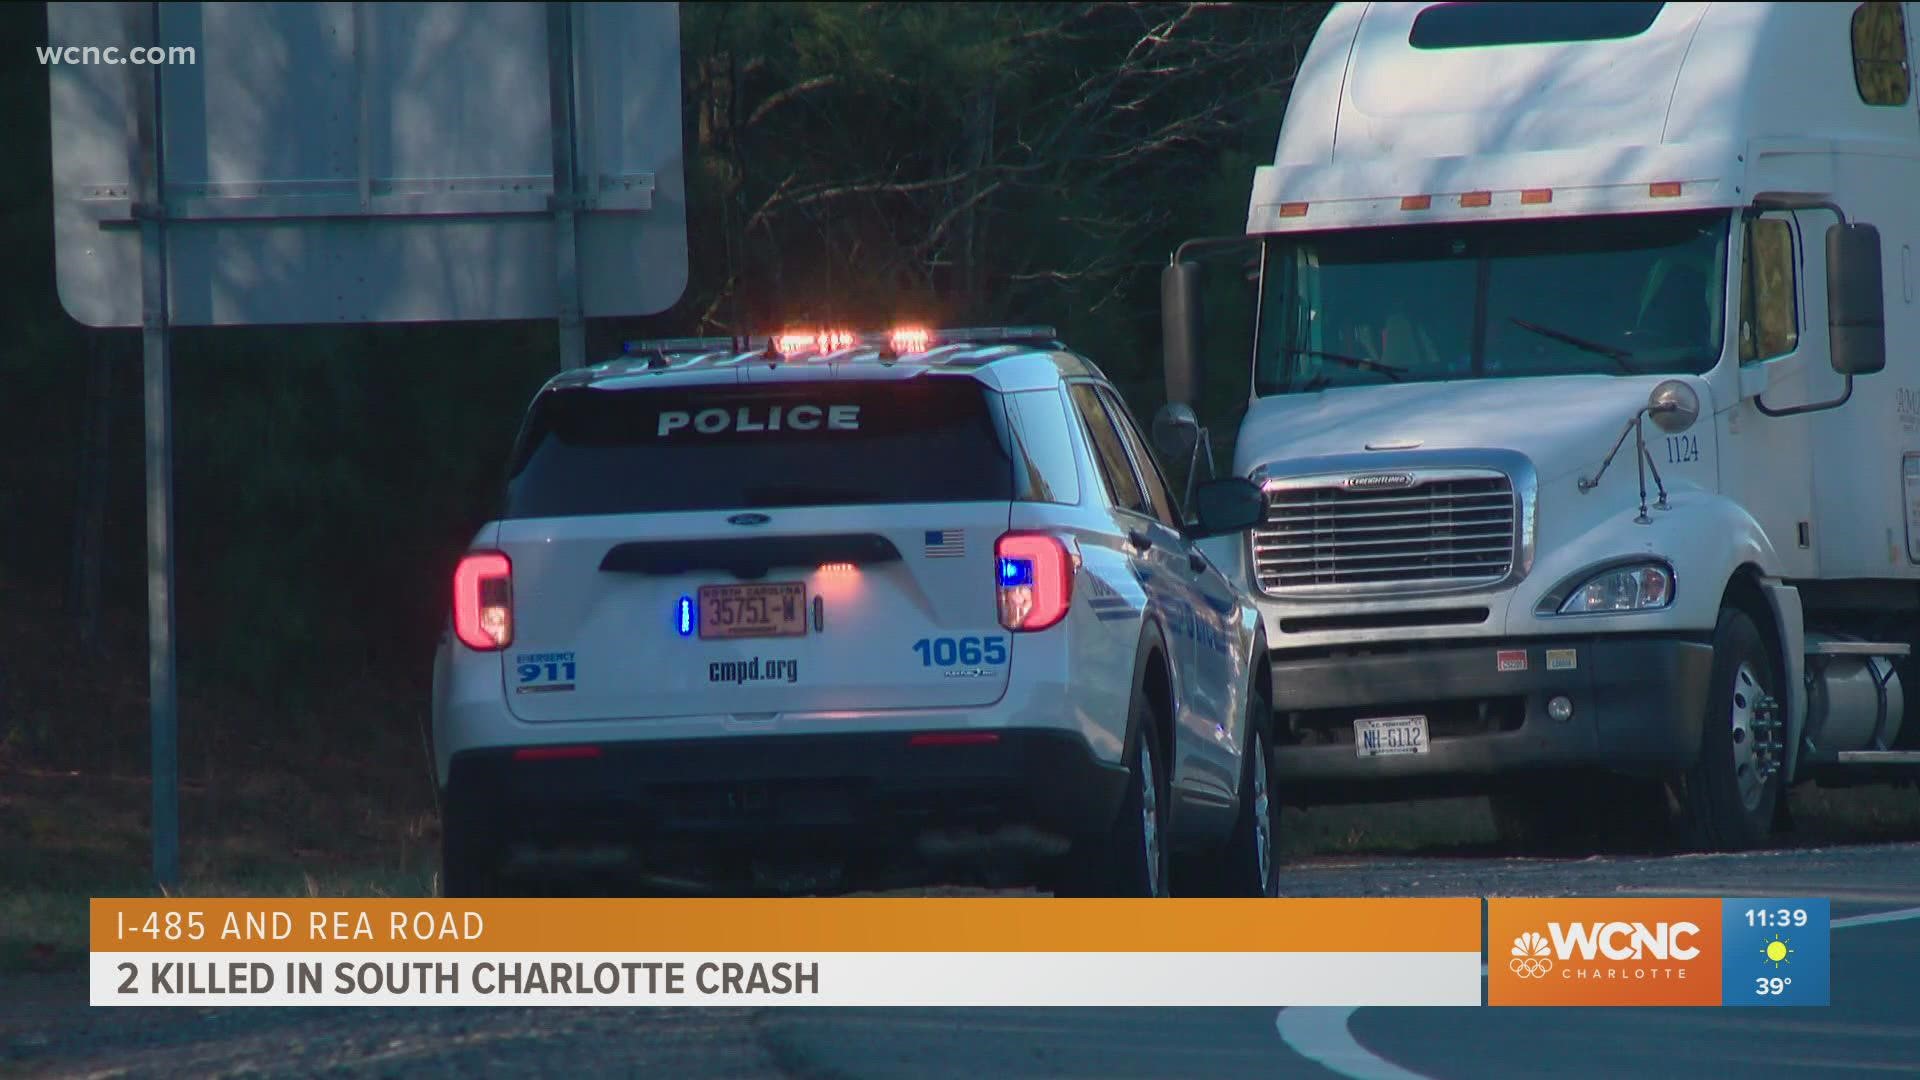 Medic said two people were hurt and another was seriously injured after a crash at I-485 and Rea Road in south Charlotte.